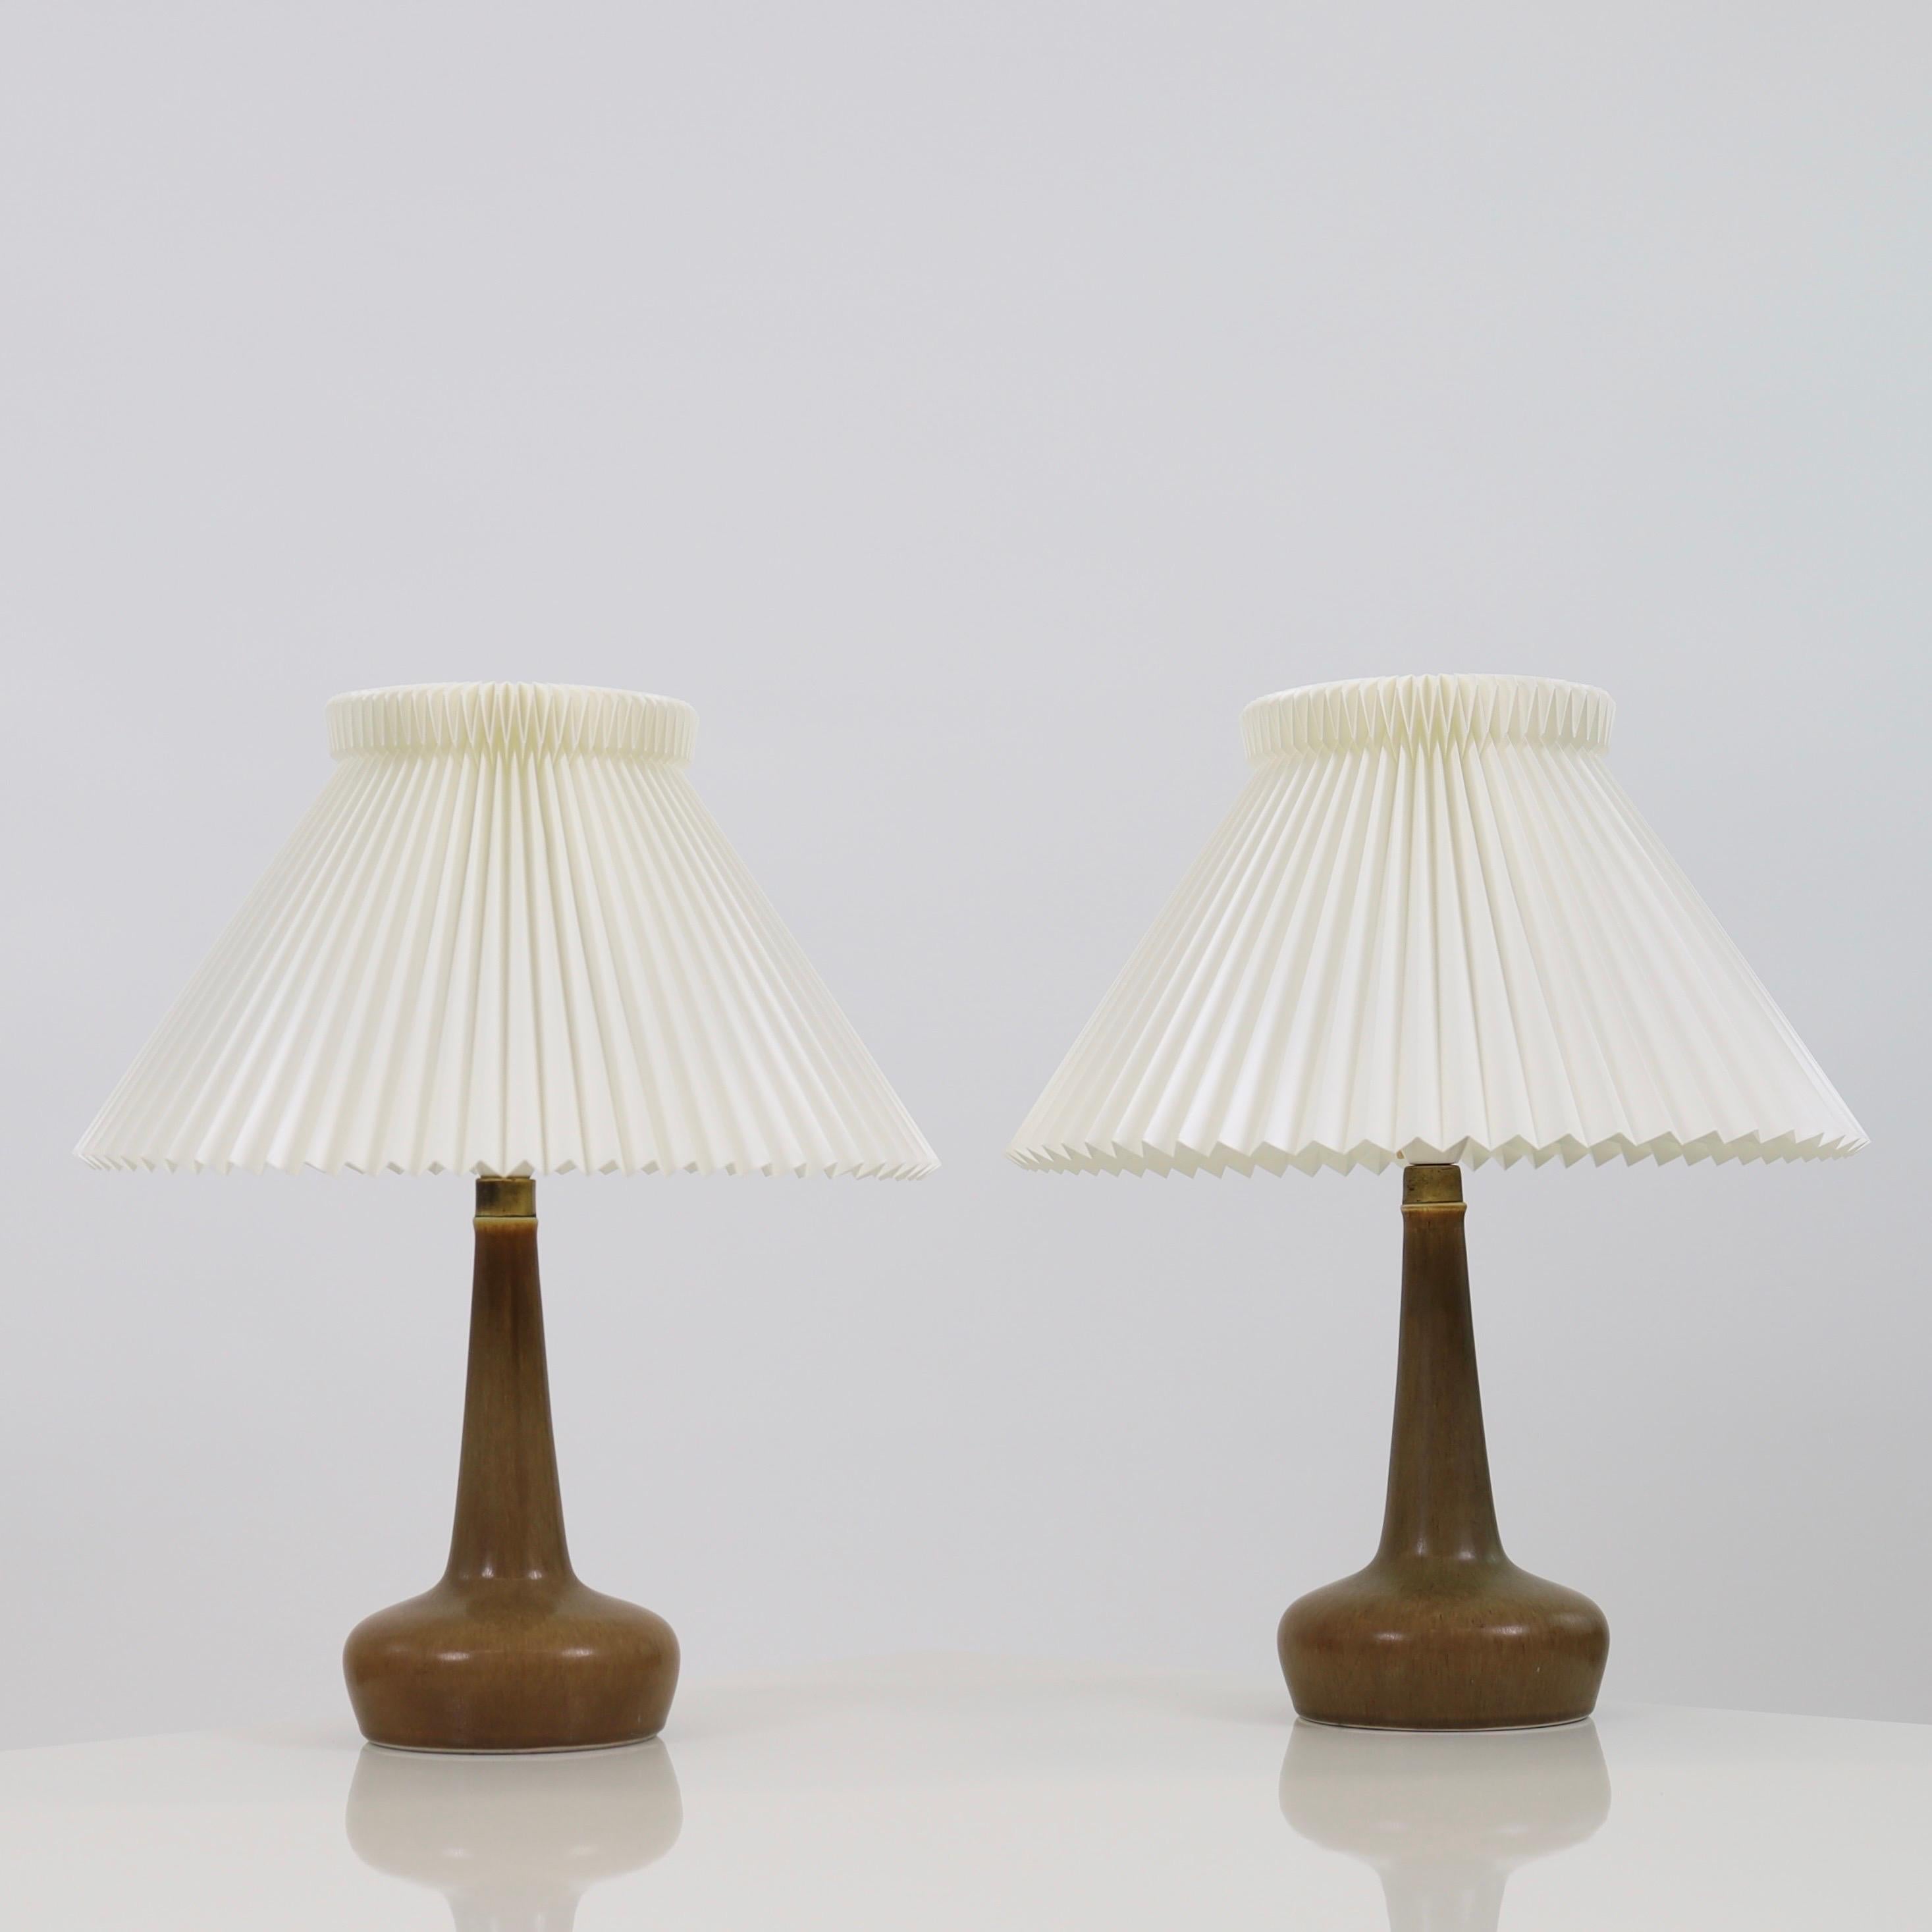 A pair of exquisite ceramic desk lamps designed by Esben Klint for Le Klint in 1949 and produced by Palshus in the 1950s.

* A set of two (2) brown ceramic desk lamps with hand-pleated shades
* Designer: Esben Klint
* Manufacturer: Palshus / Le